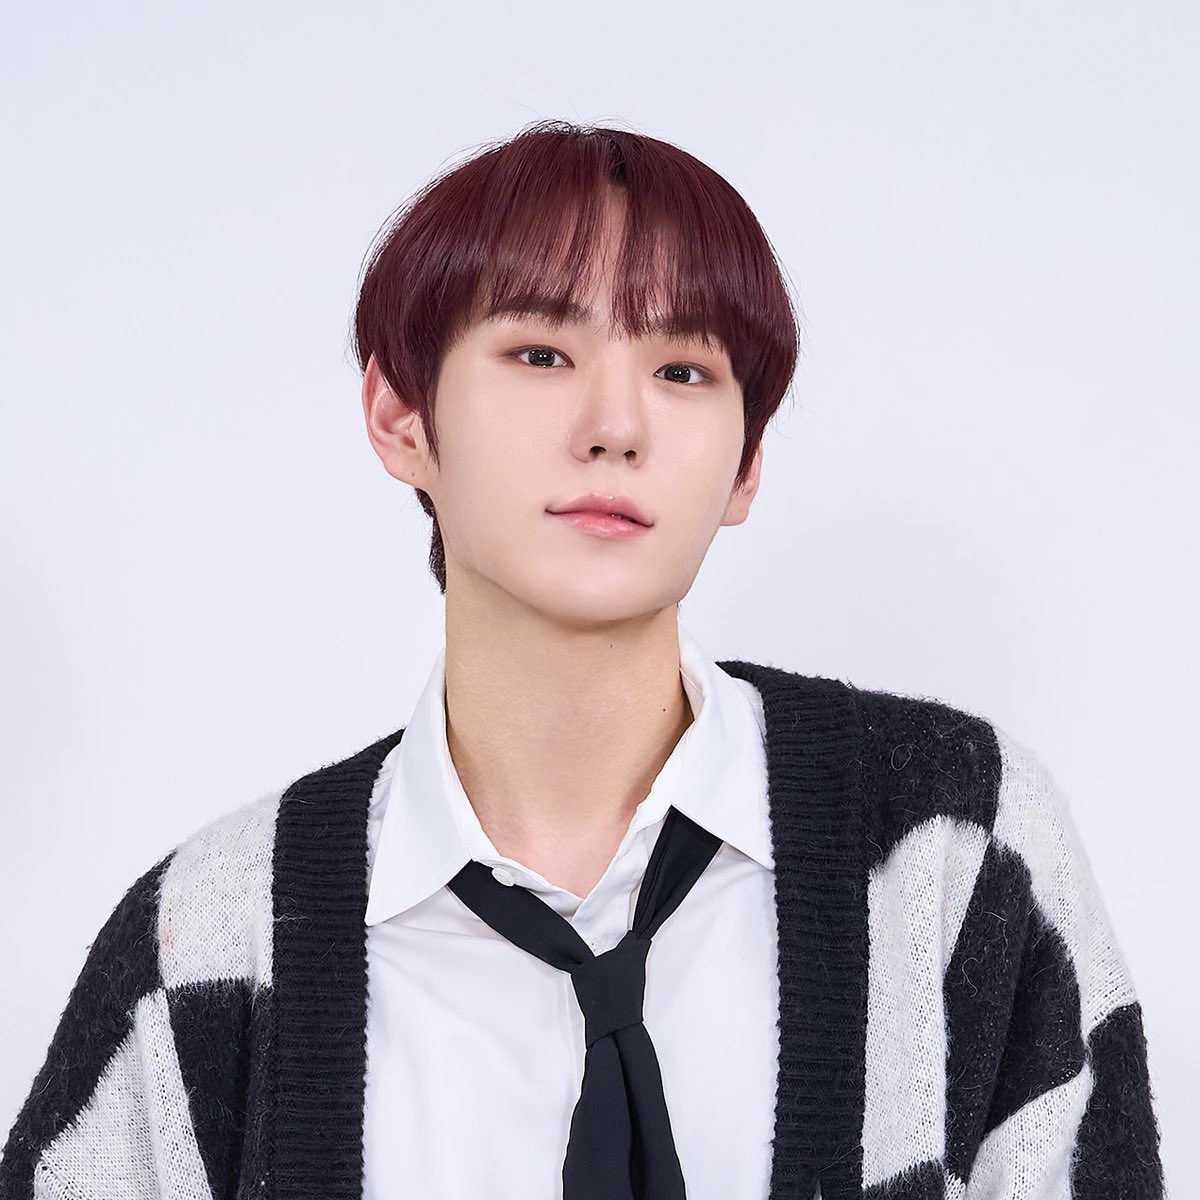 Former BDC member Hong Seongjun has announced through a recent Instagram live that he is enlisting soon, and will hold a special fanmeeting on June 8th before heading off to the military.